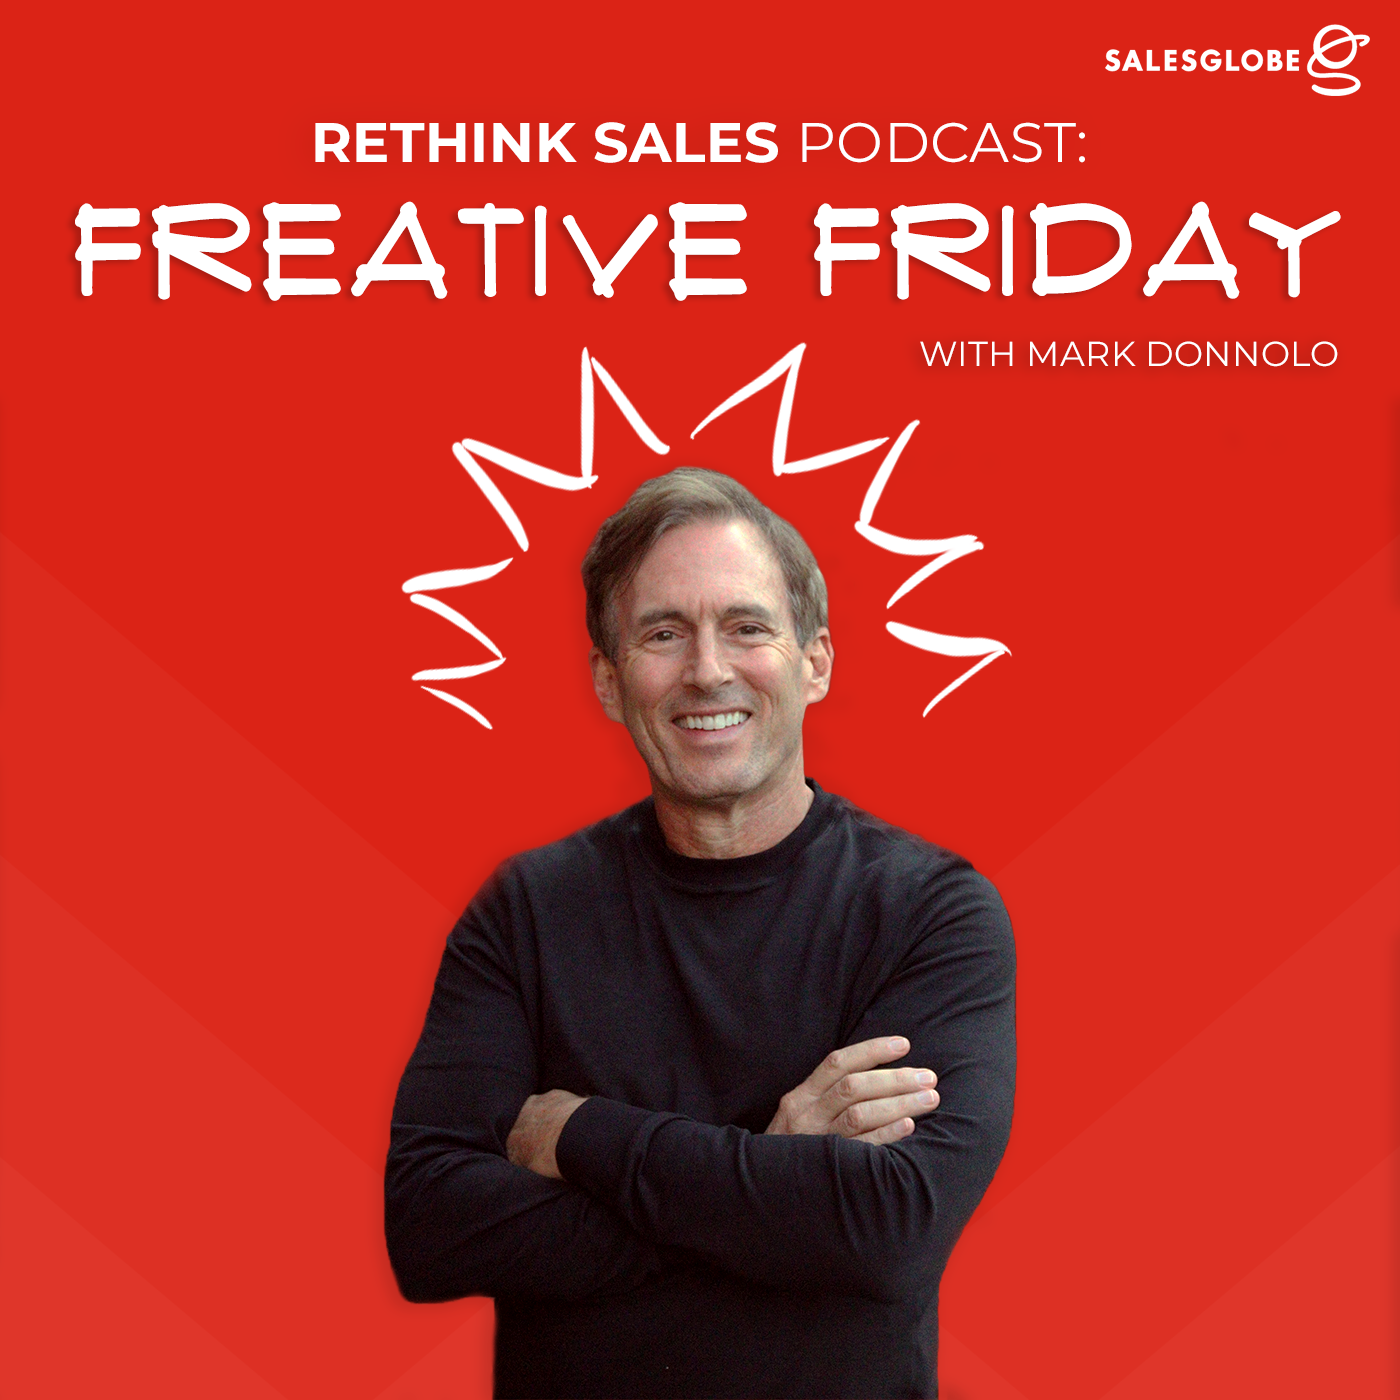 94: Freative Friday - Why Good Organizations Get Lost on Growth